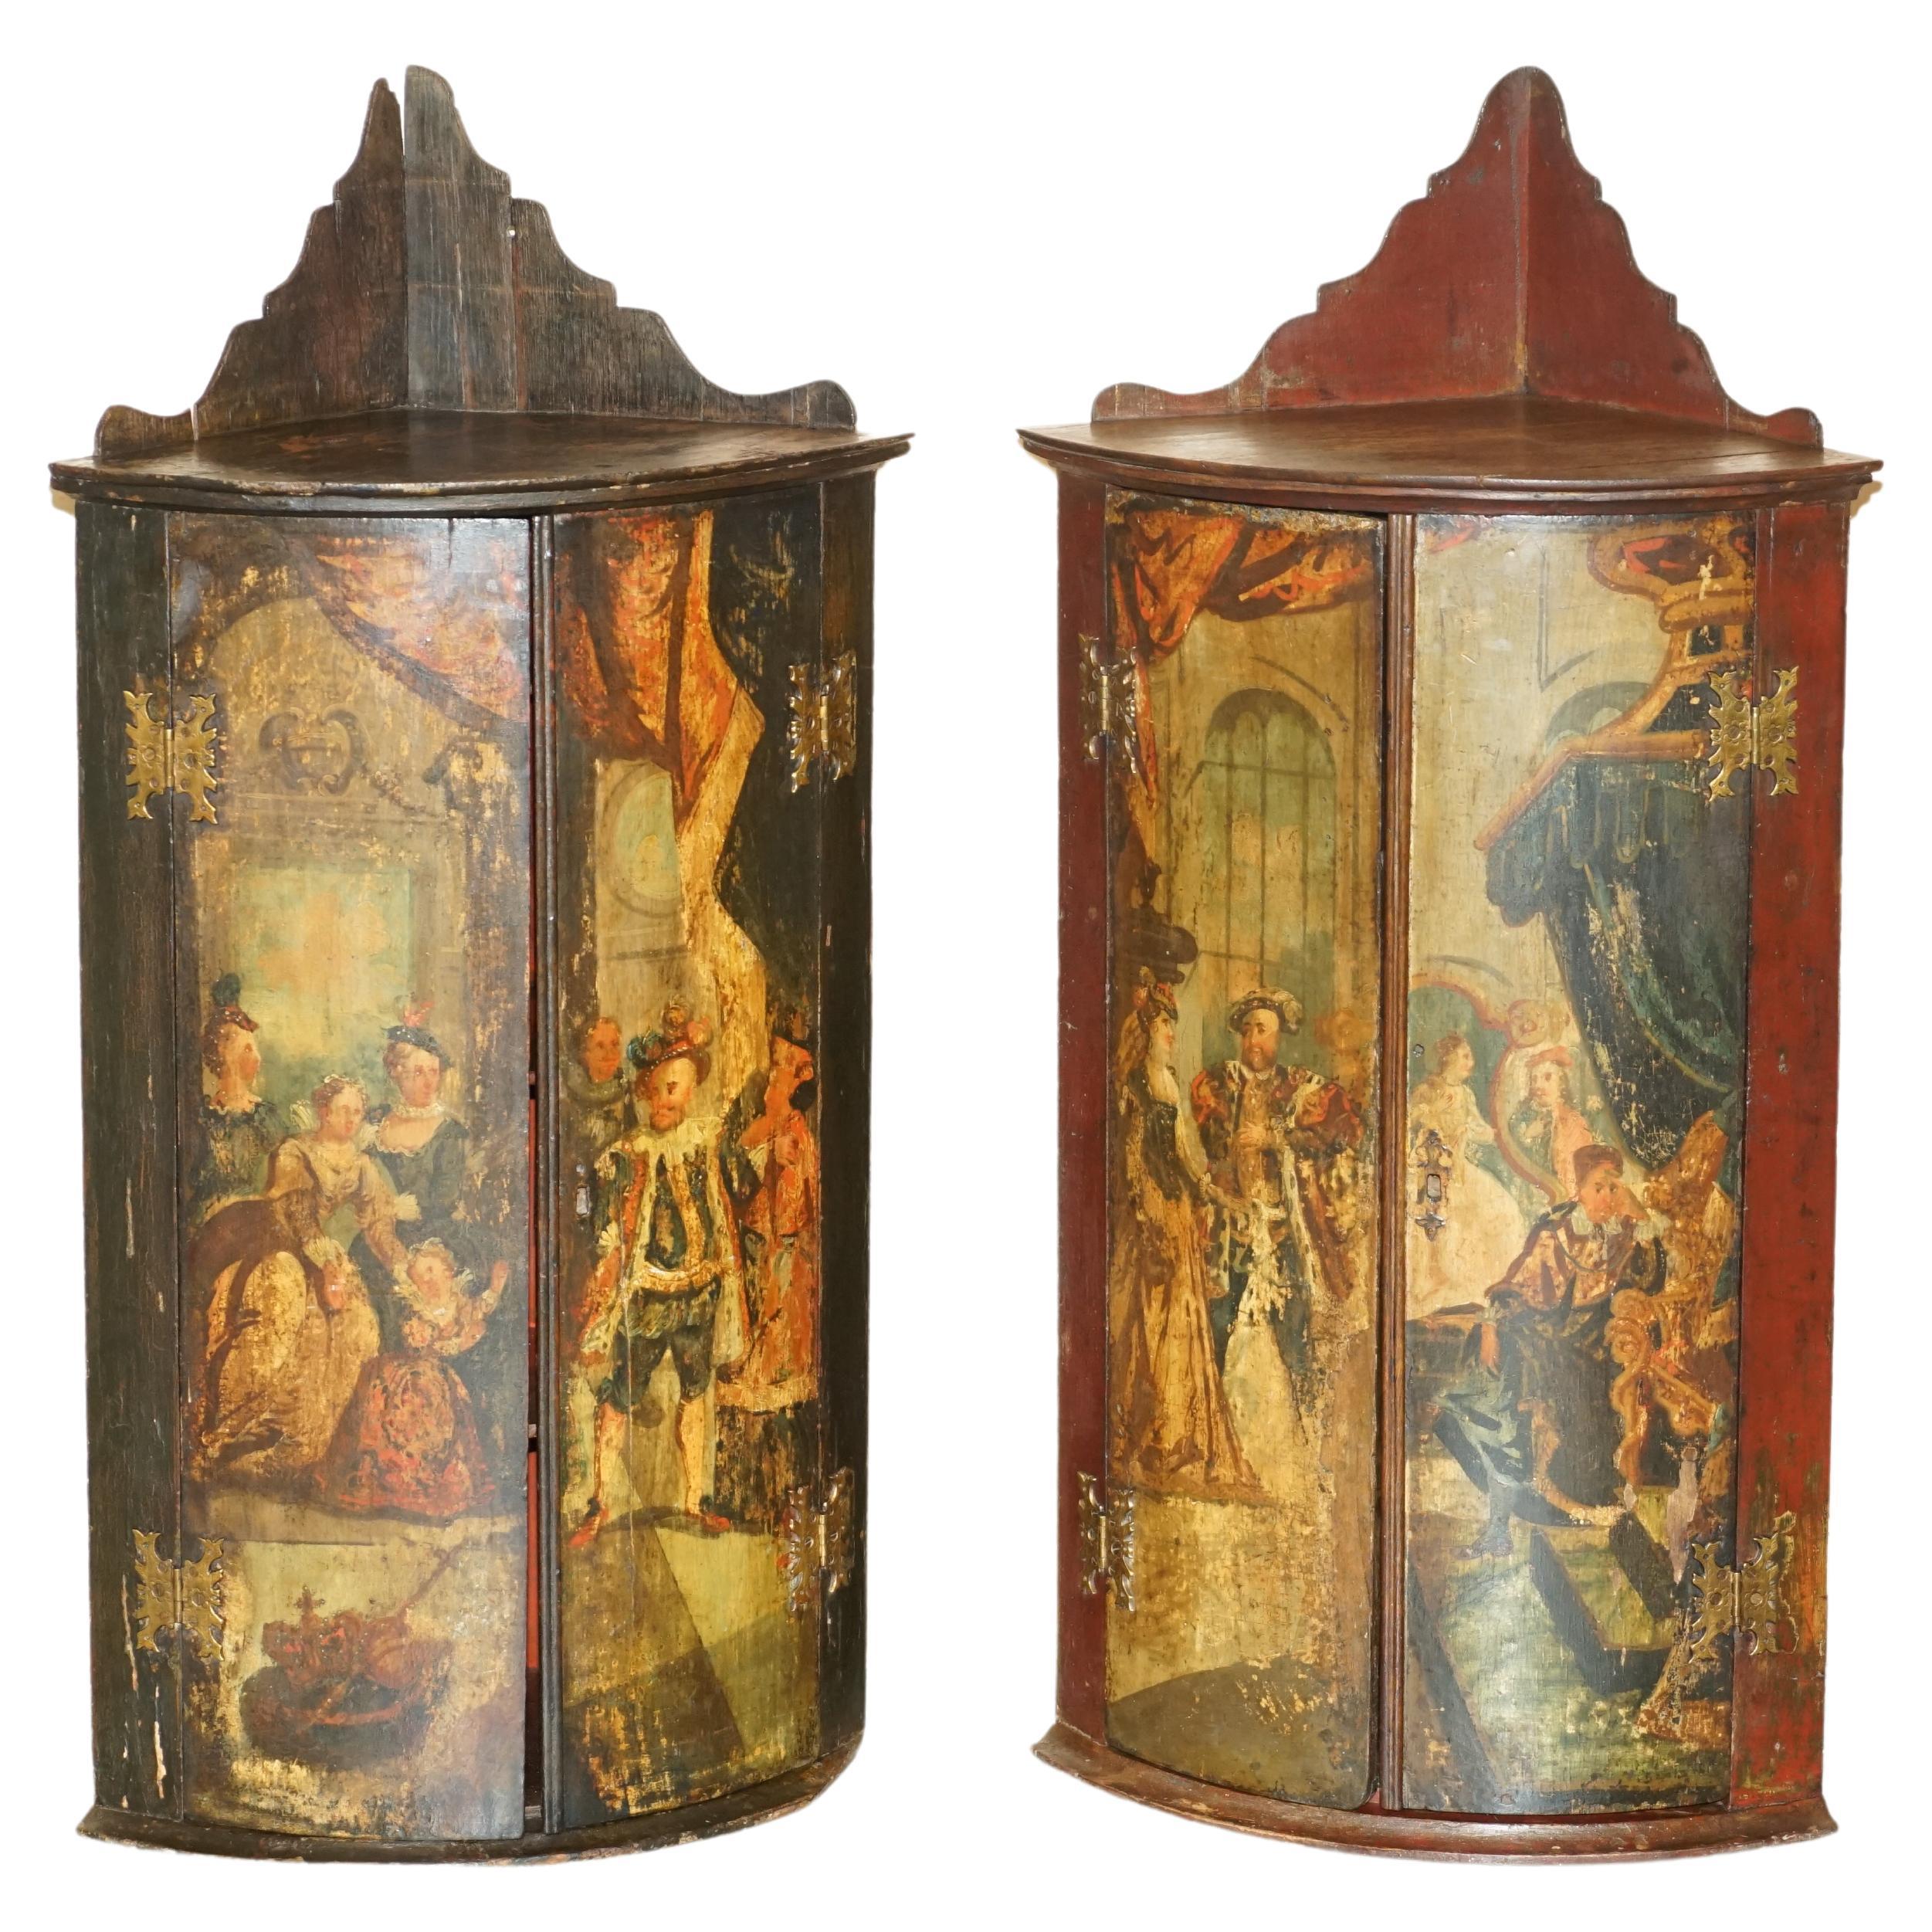 PAIR OF GEORGE I CIRCA 1700 HENRY VIII POLYCHROME PAiNTED CORNER WALL CABINETS For Sale